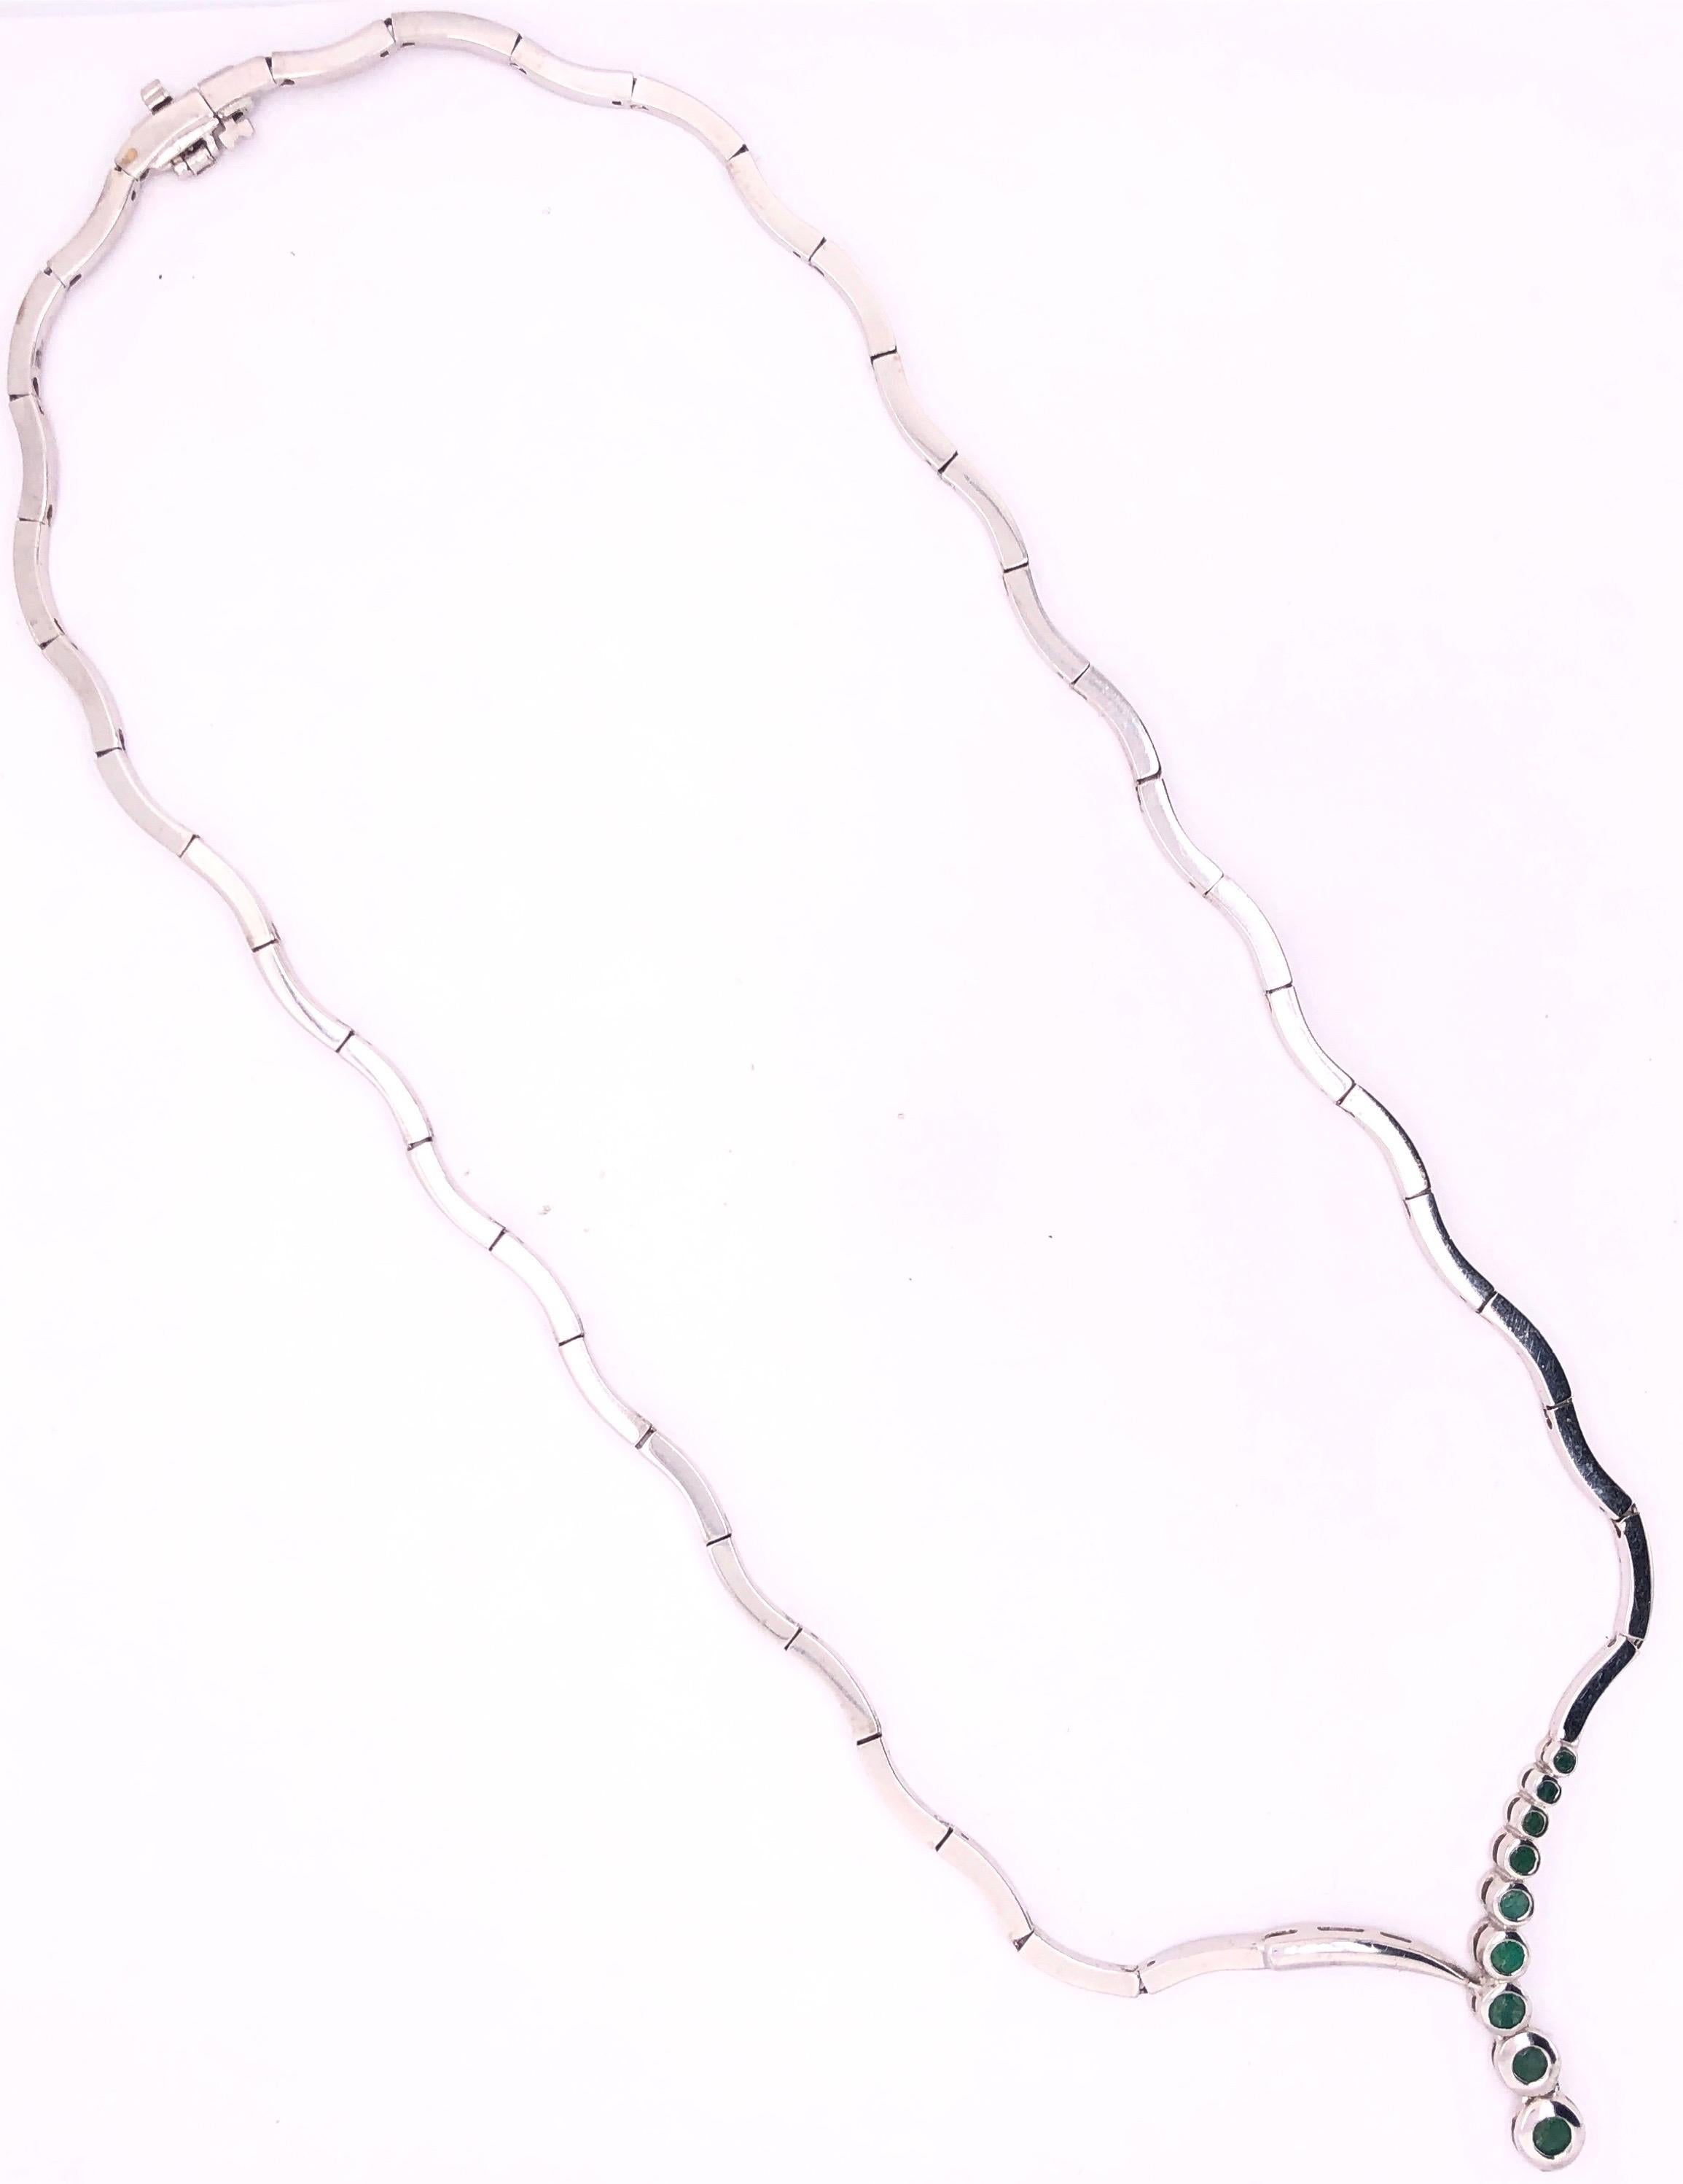 14 Karat White Gold Fashion Necklace with Round Emeralds For Sale 6